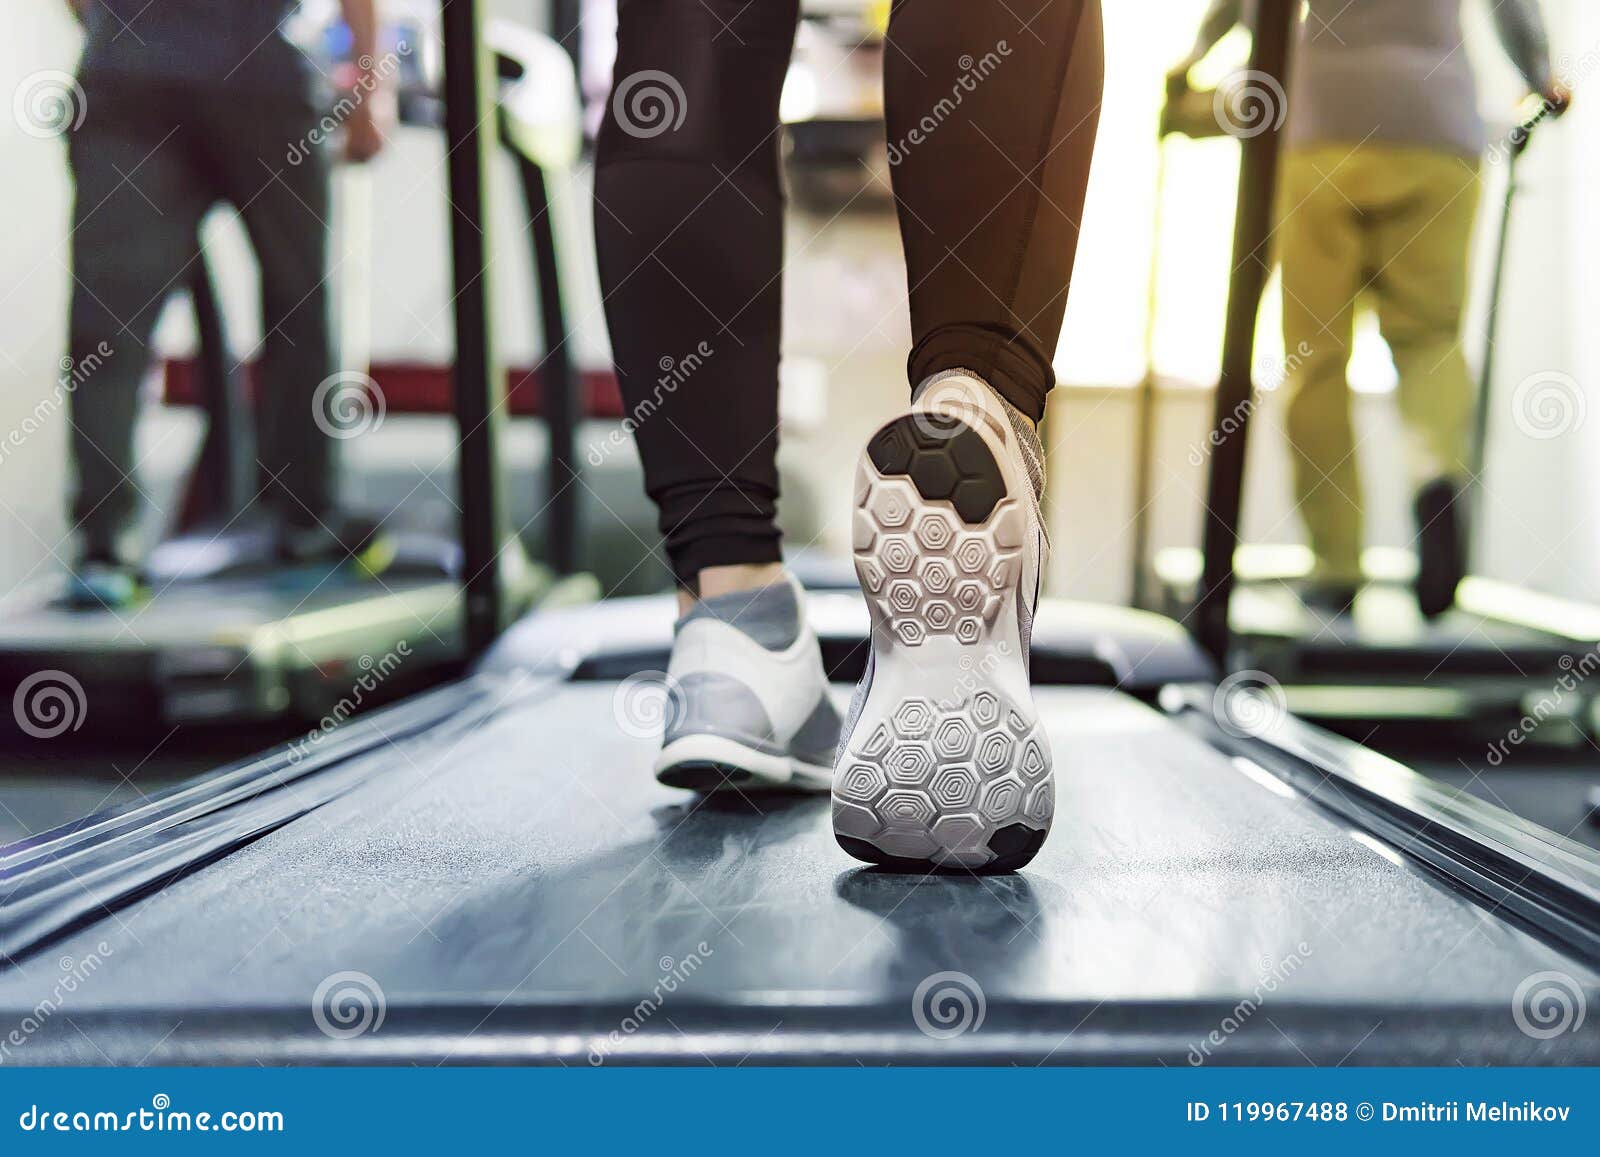 exercise treadmill cardio running workout at fitness gym of woman taking weight loss with machine aerobic for slim and firm health